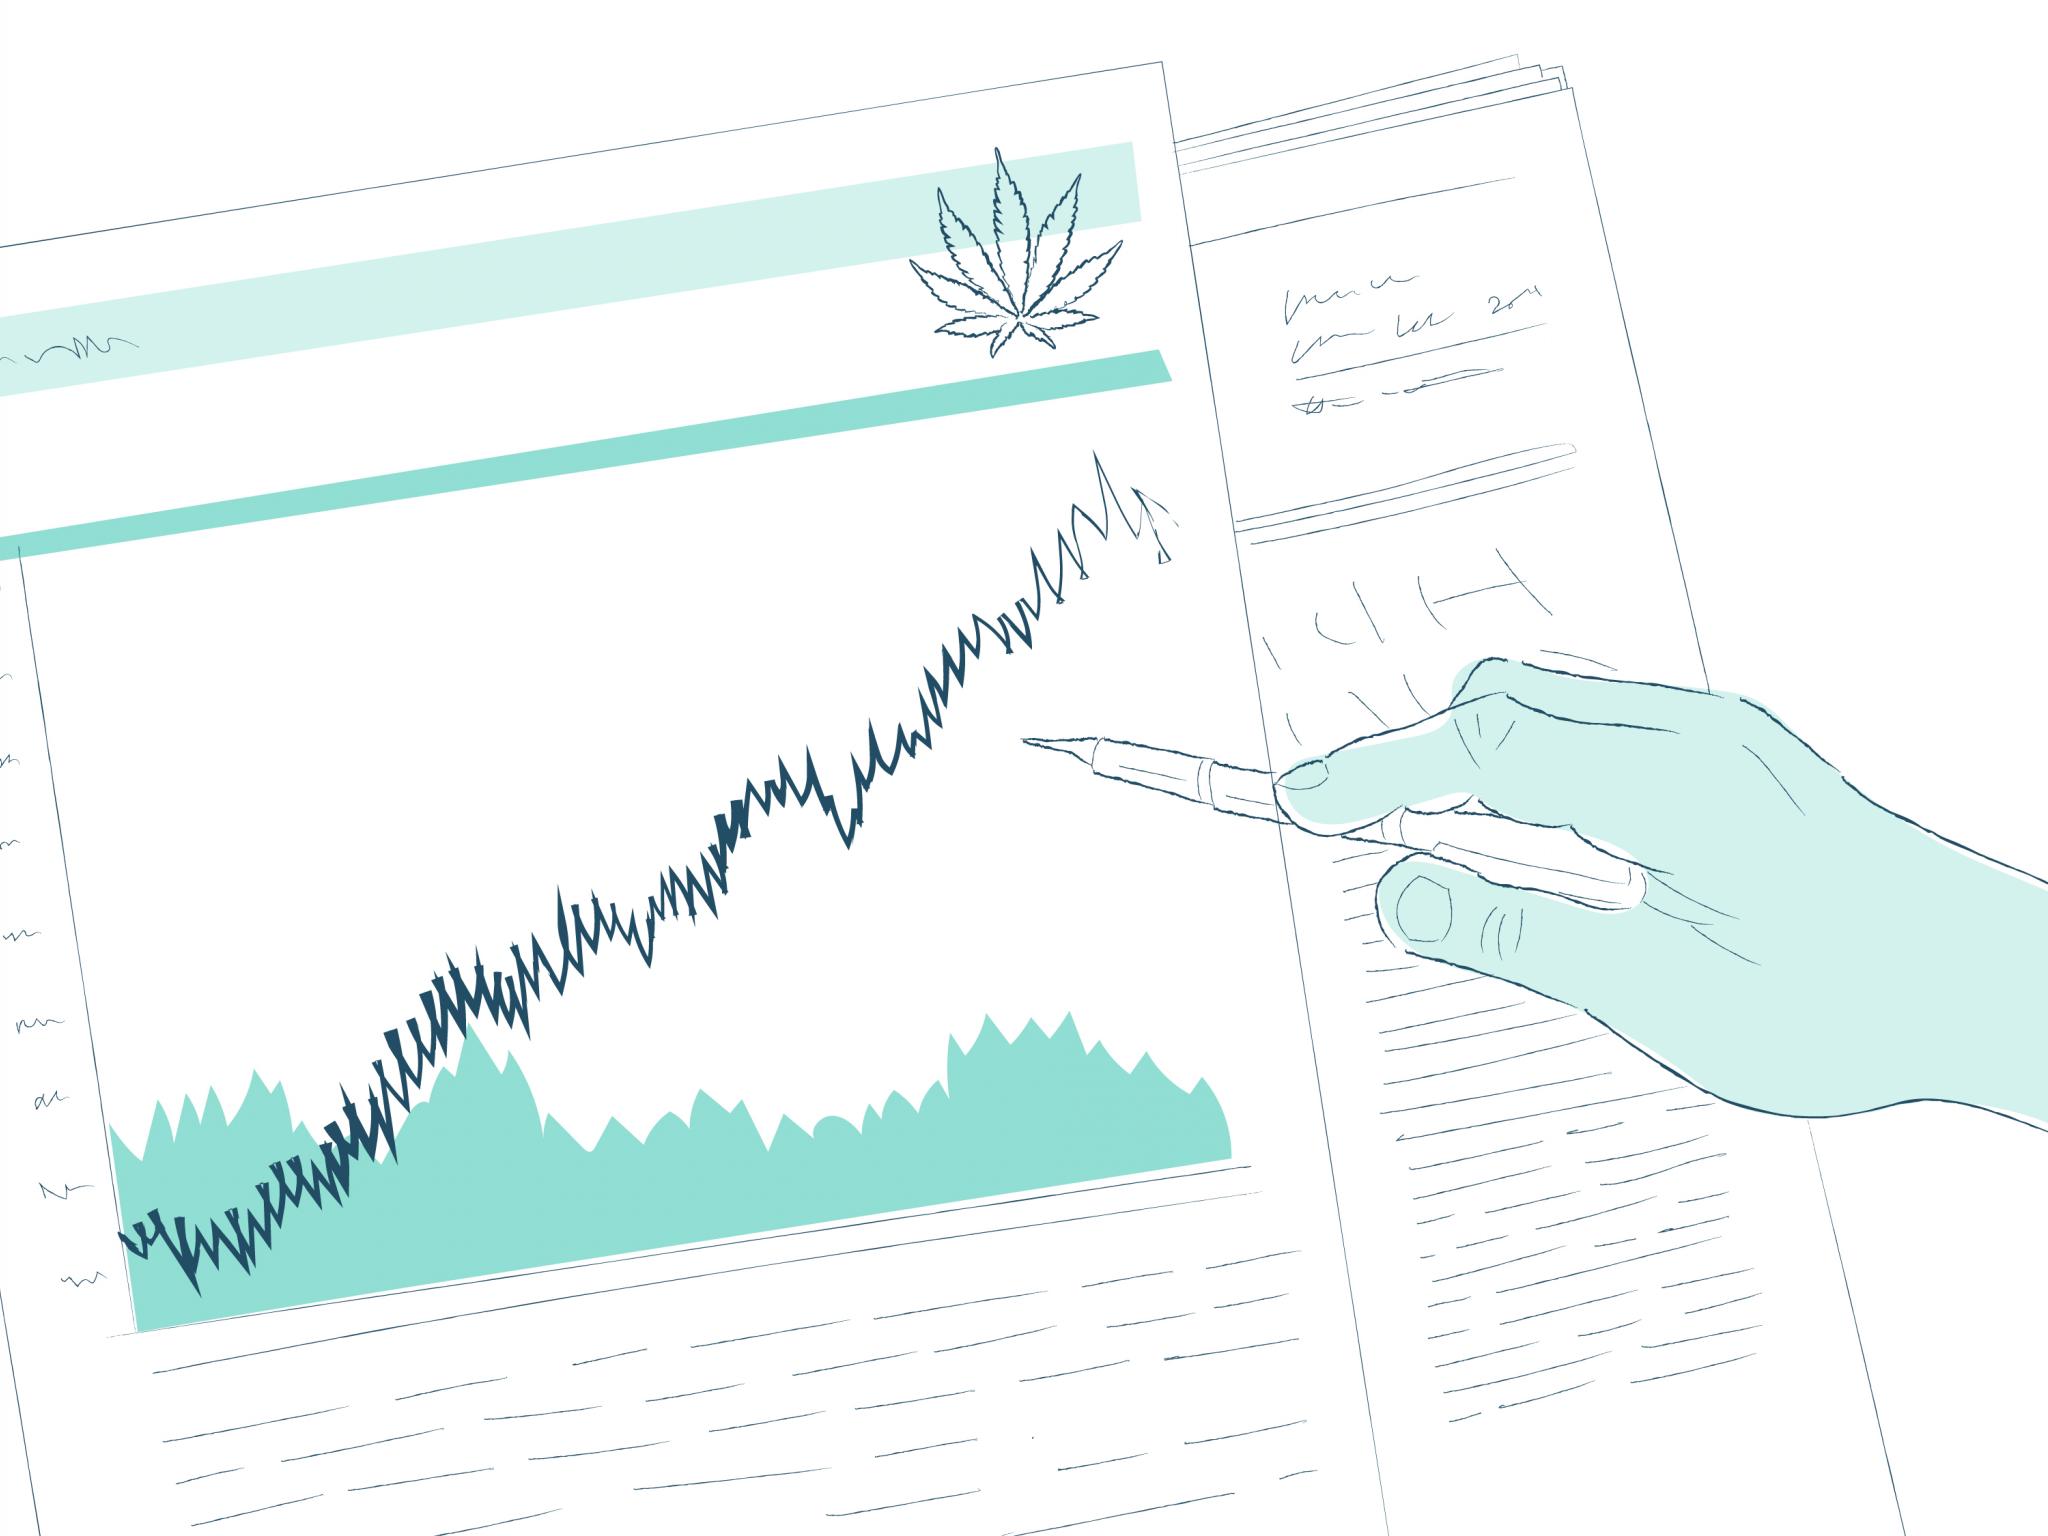  cannabis-stock-gainers-and-losers-from-april-6-2020 